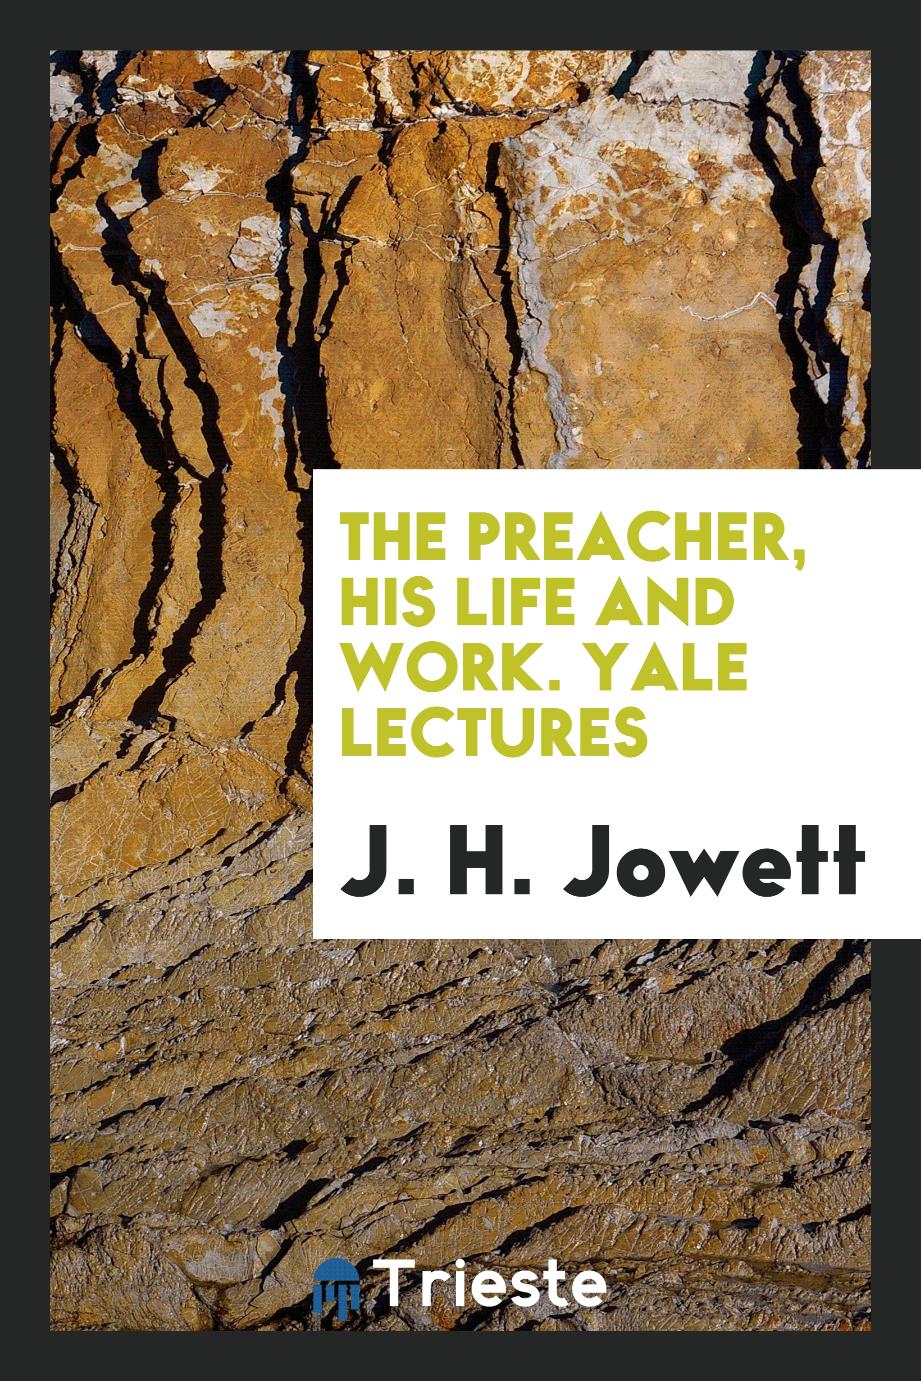 The preacher, his life and work. Yale lectures